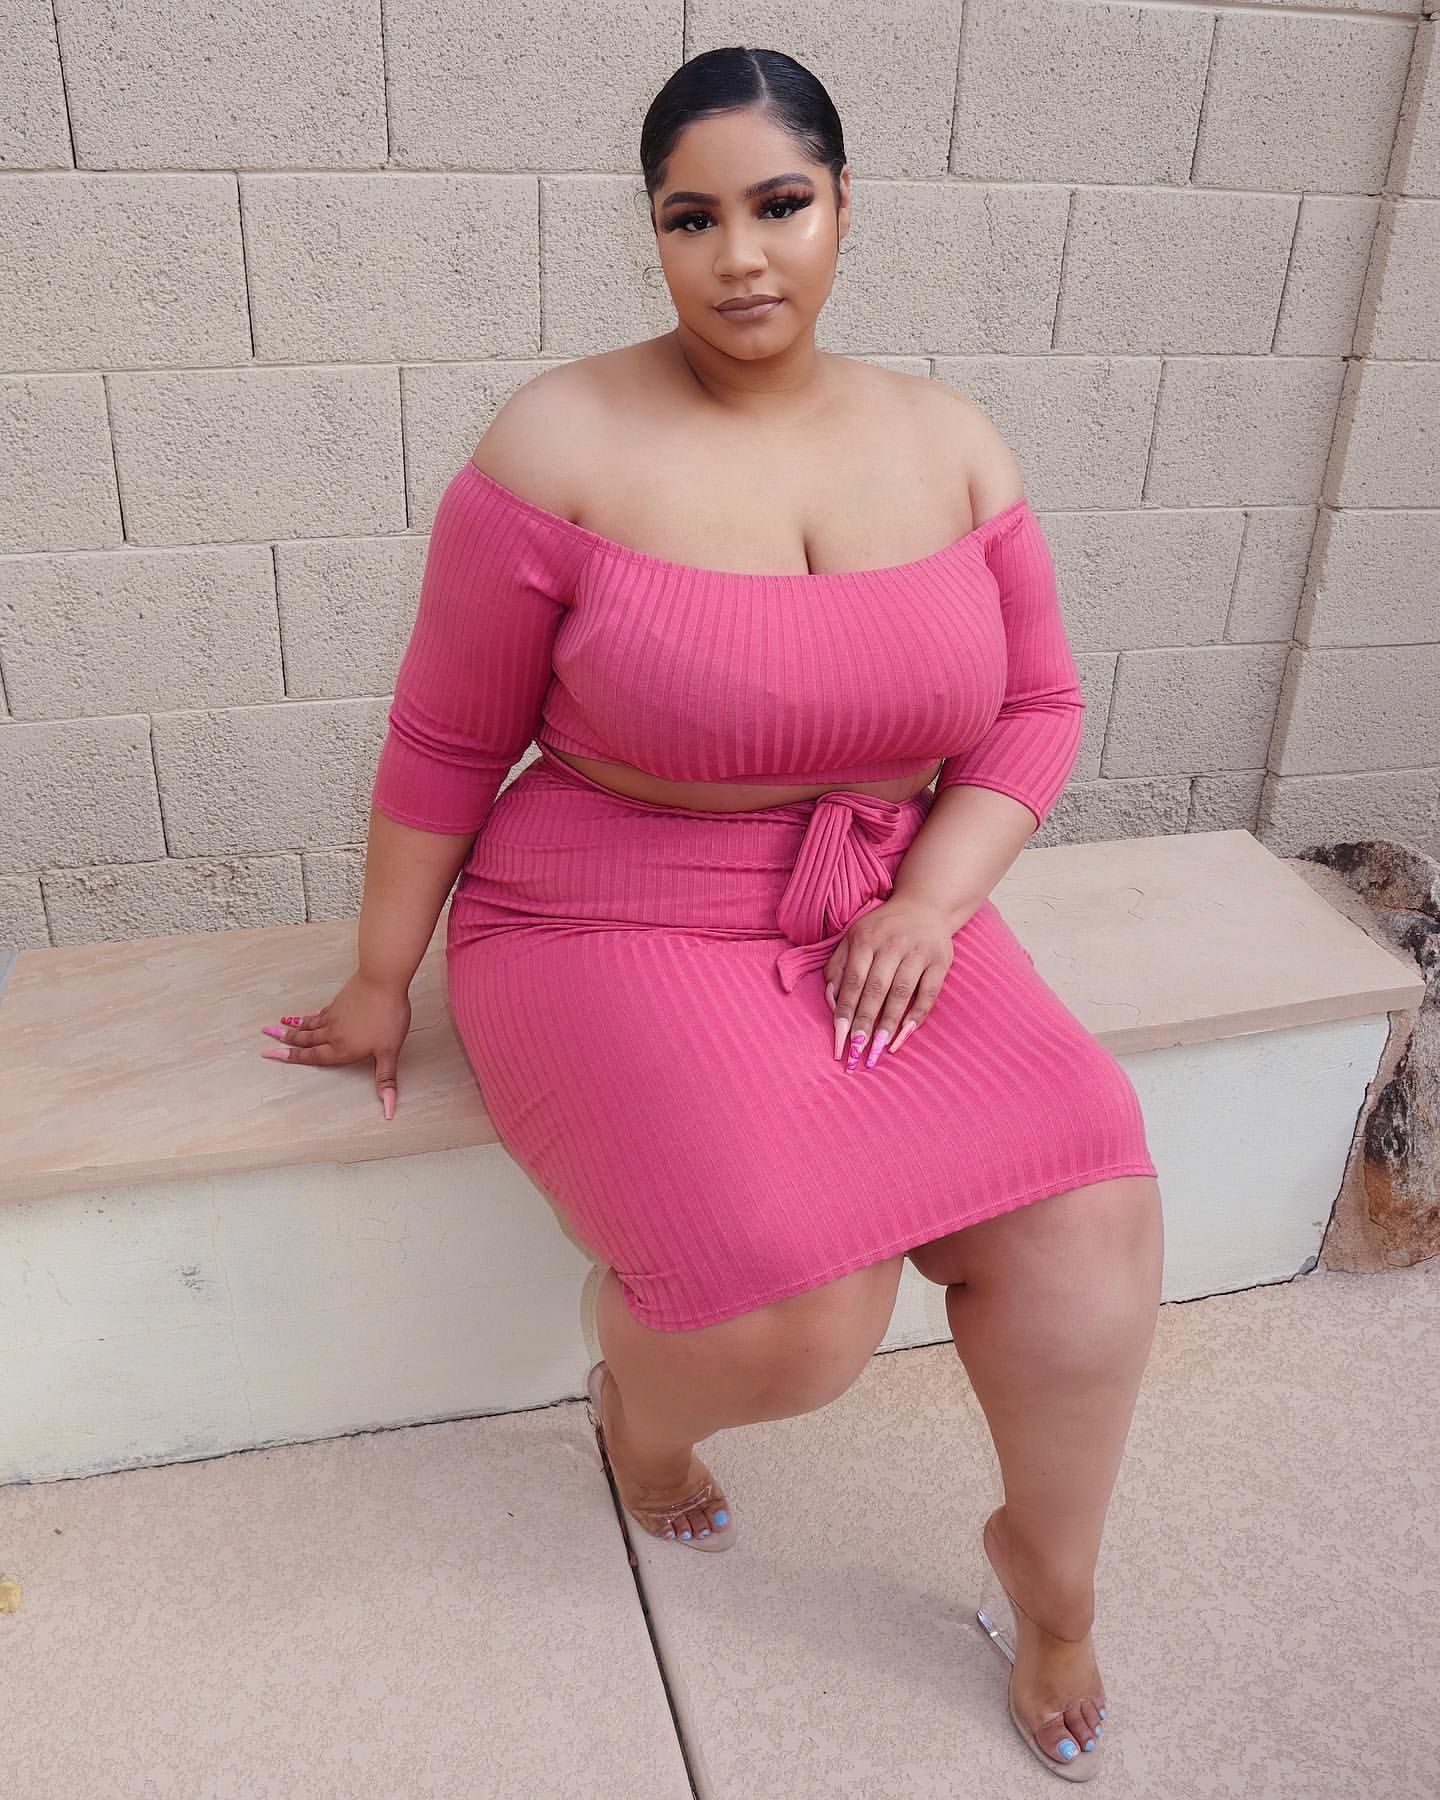 campbell reynolds recommends curvy bbw com pic